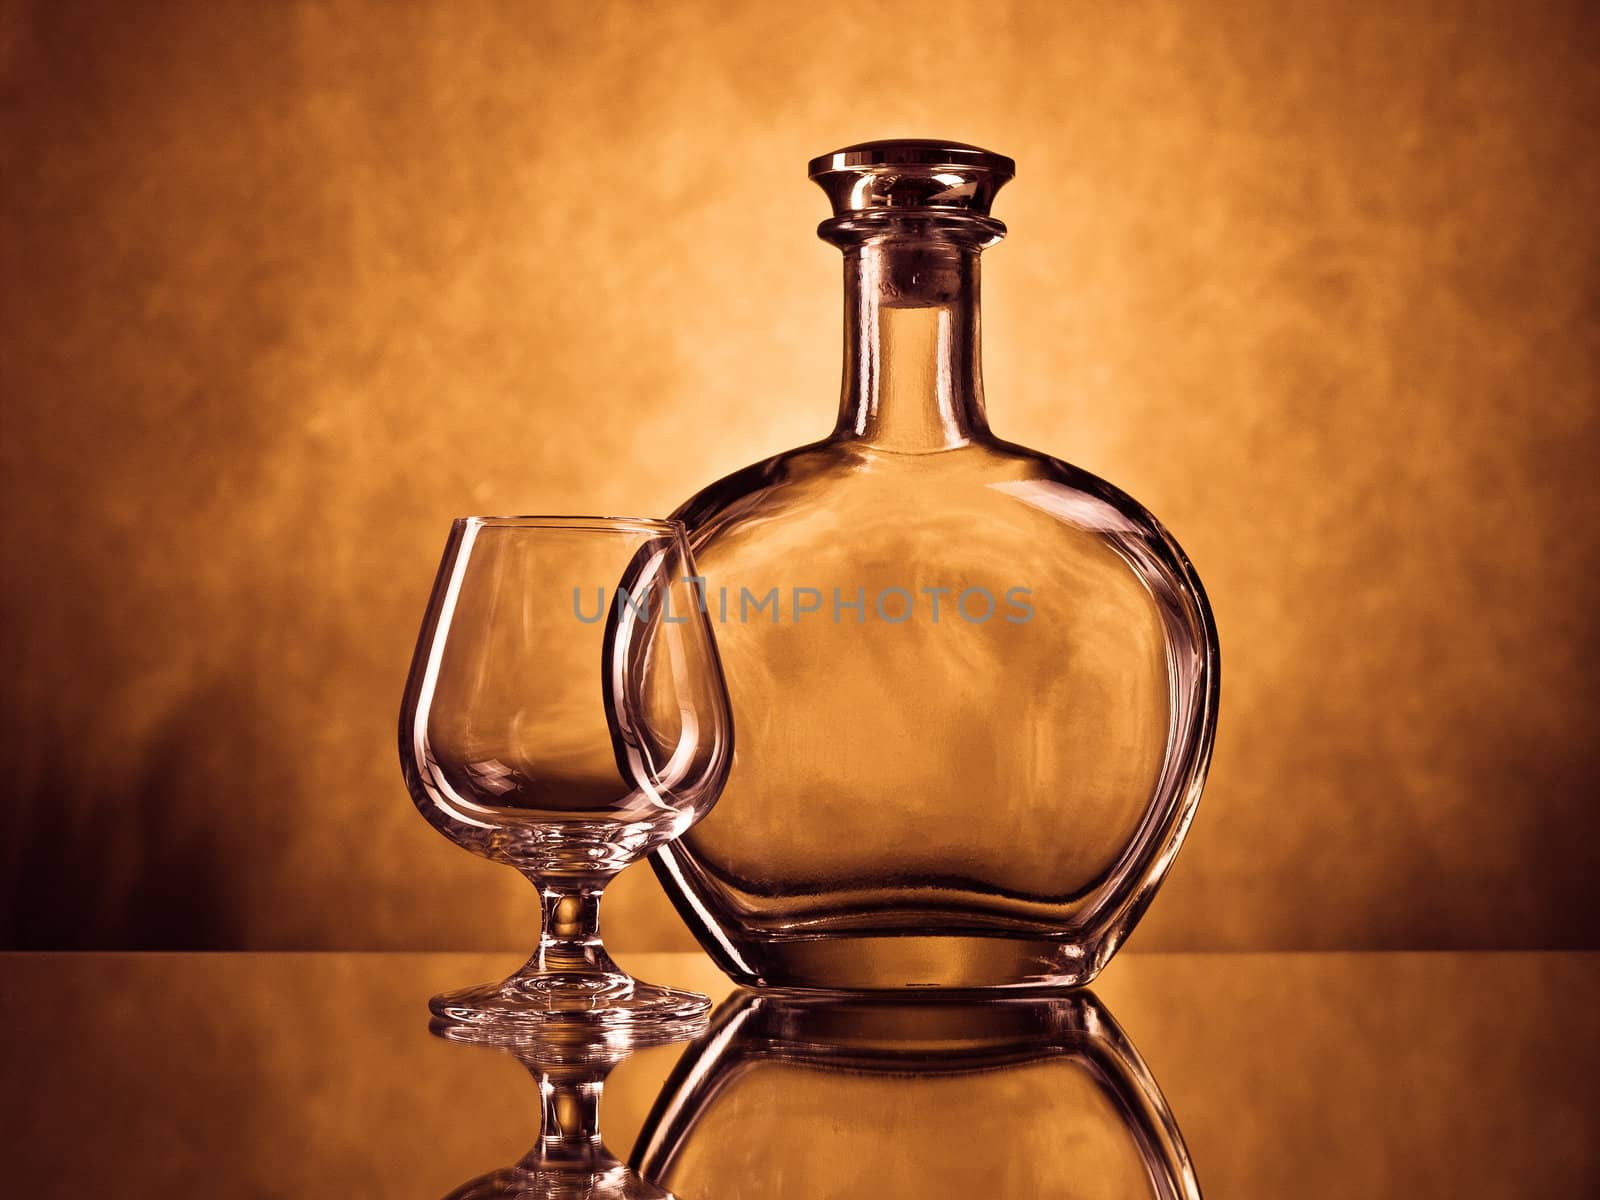 Empty cognac bottle and a cognac glass on a reflective suface against grunge background